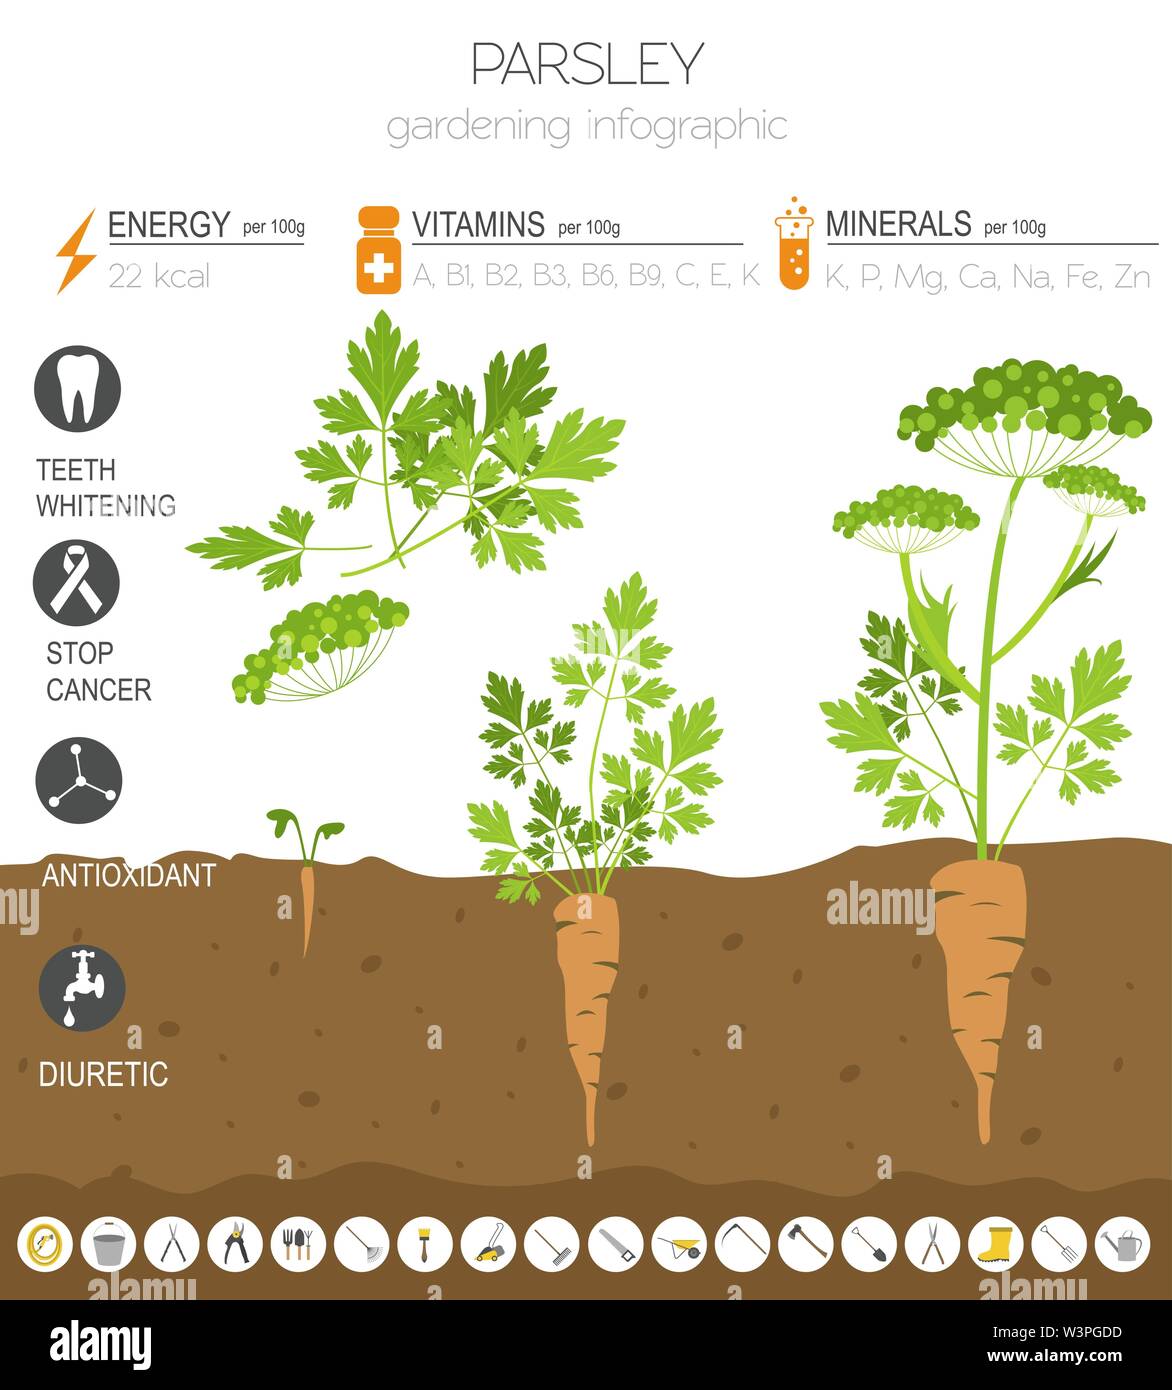 Parsley beneficial features graphic template. Gardening, farming infographic, how it grows. Flat style design. Vector illustration Stock Vector